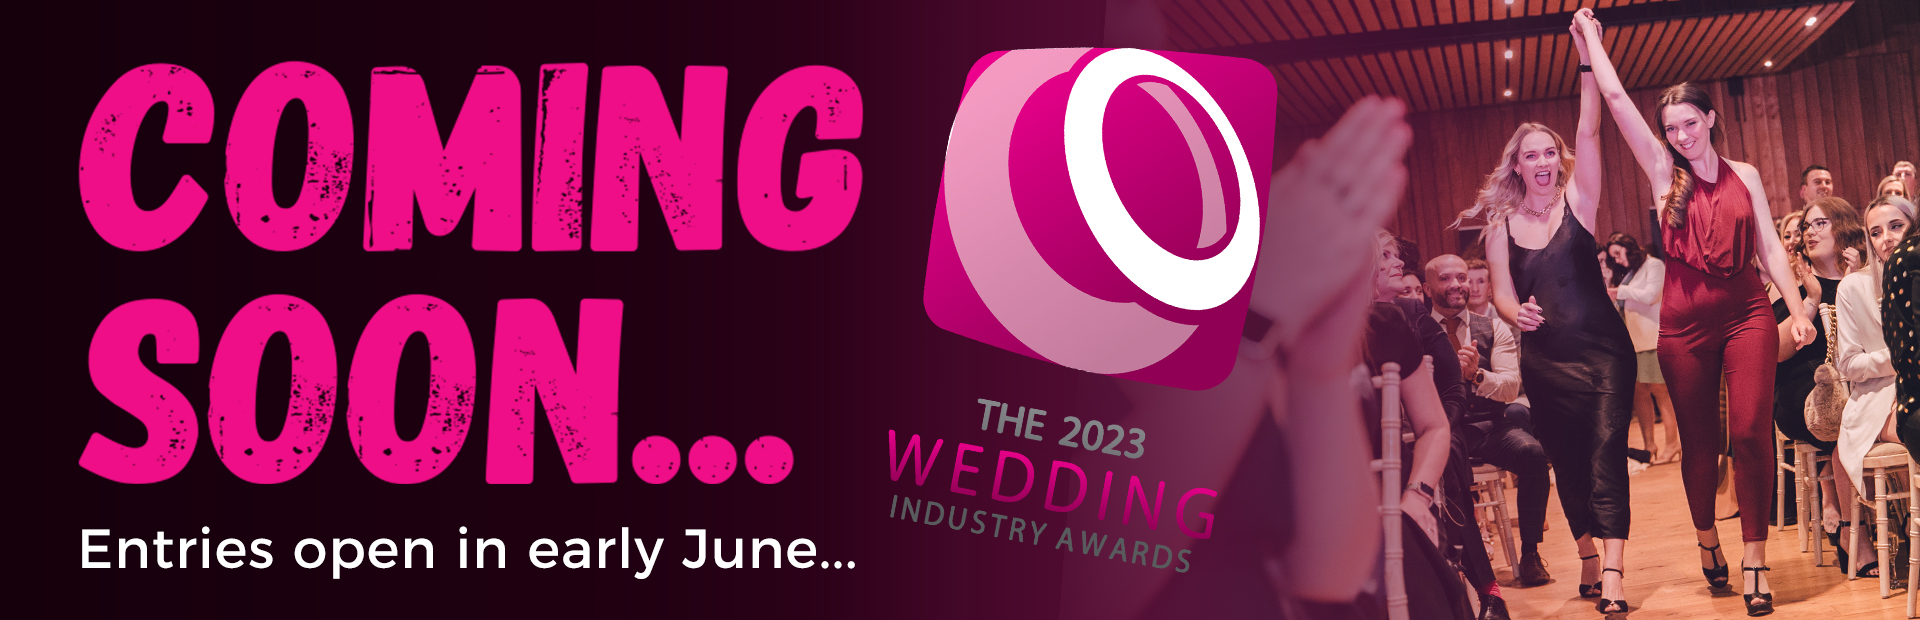 TWIA 2023 COMING SOON - ENTRIES OPEN IN EARLY JUNE